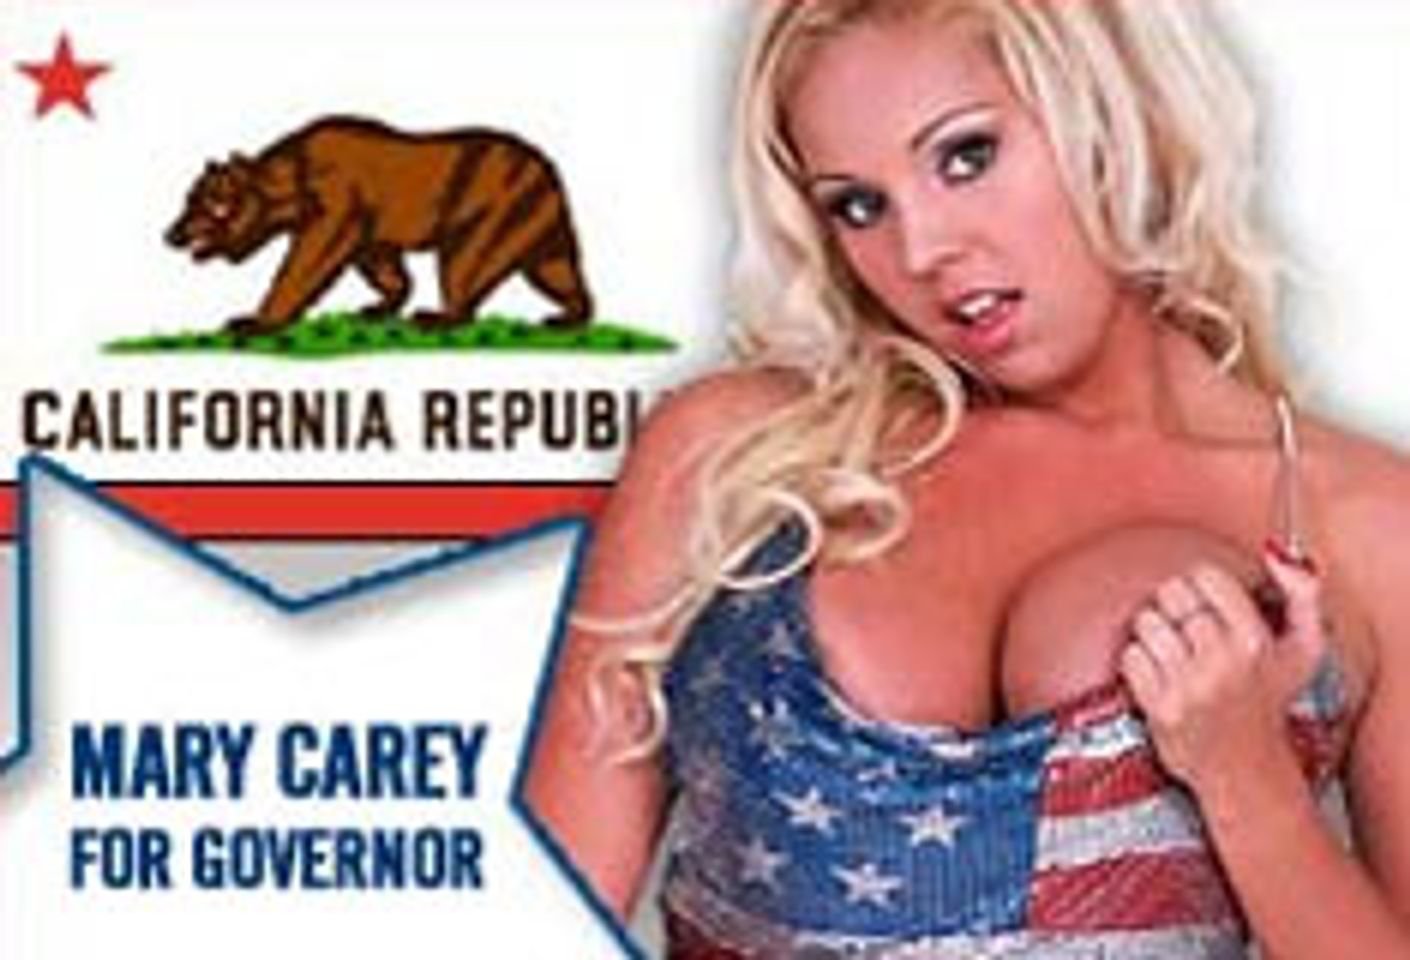 Mary Carey to Host Wet T-Shirt Contests for Peach DVD